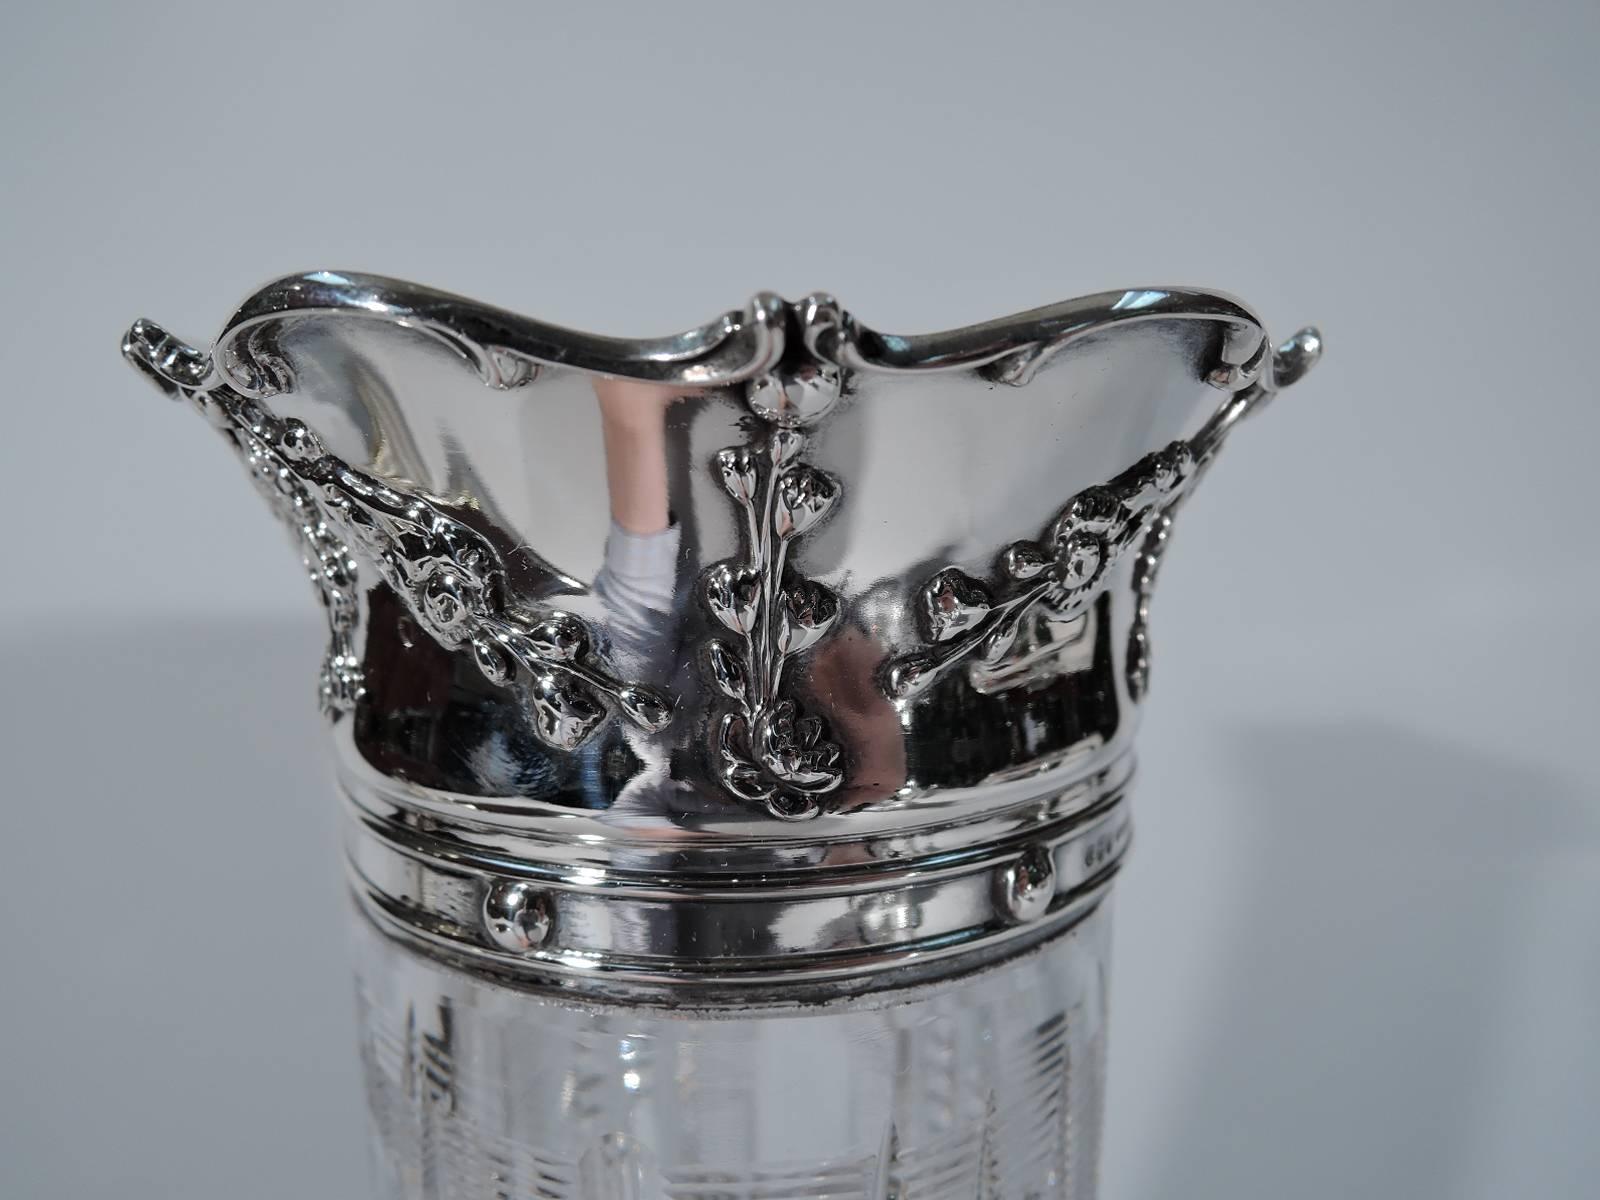 Brilliant cut-glass vase with sterling silver collar. Made by Gorham in Providence, circa 1900. Cylindrical with spread base. Vertical ornament with alternating flutes, ribbing, and notching as well as fans and lozenges with inset circles at base.